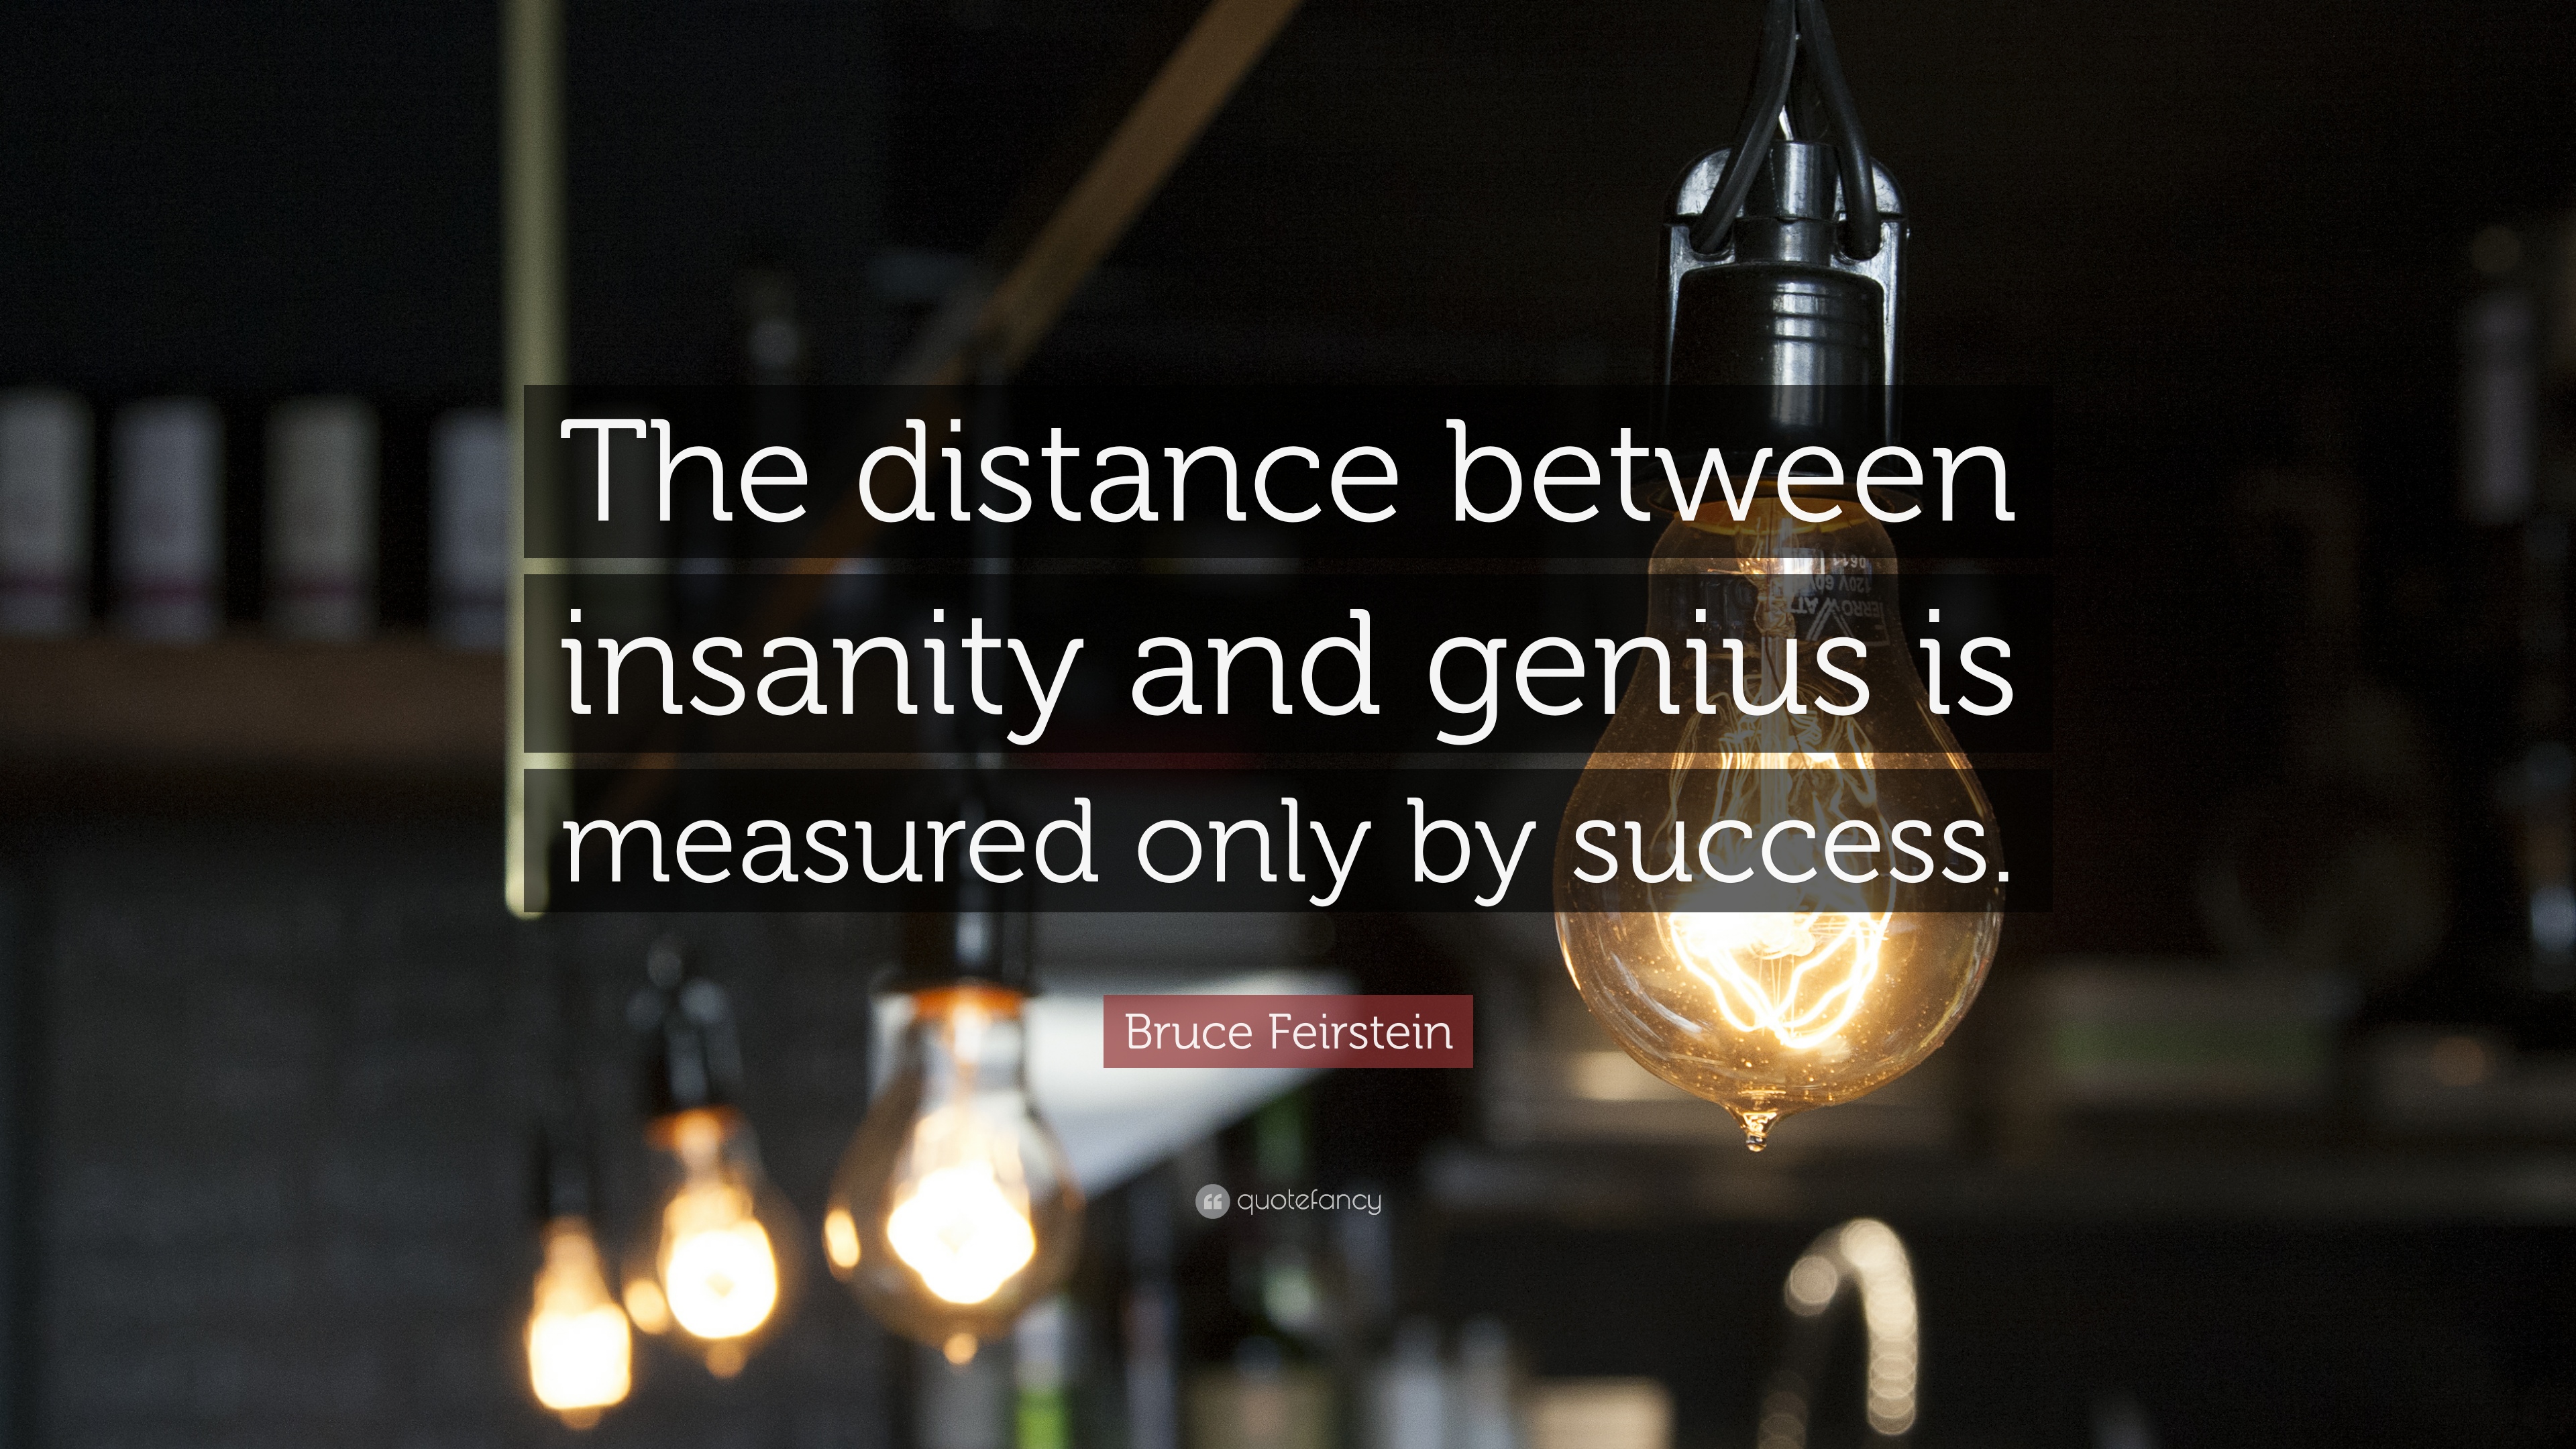 Bruce Feirstein Quote - Distance Between Insanity And Genius Is Measured  Only - 3840x2160 Wallpaper 